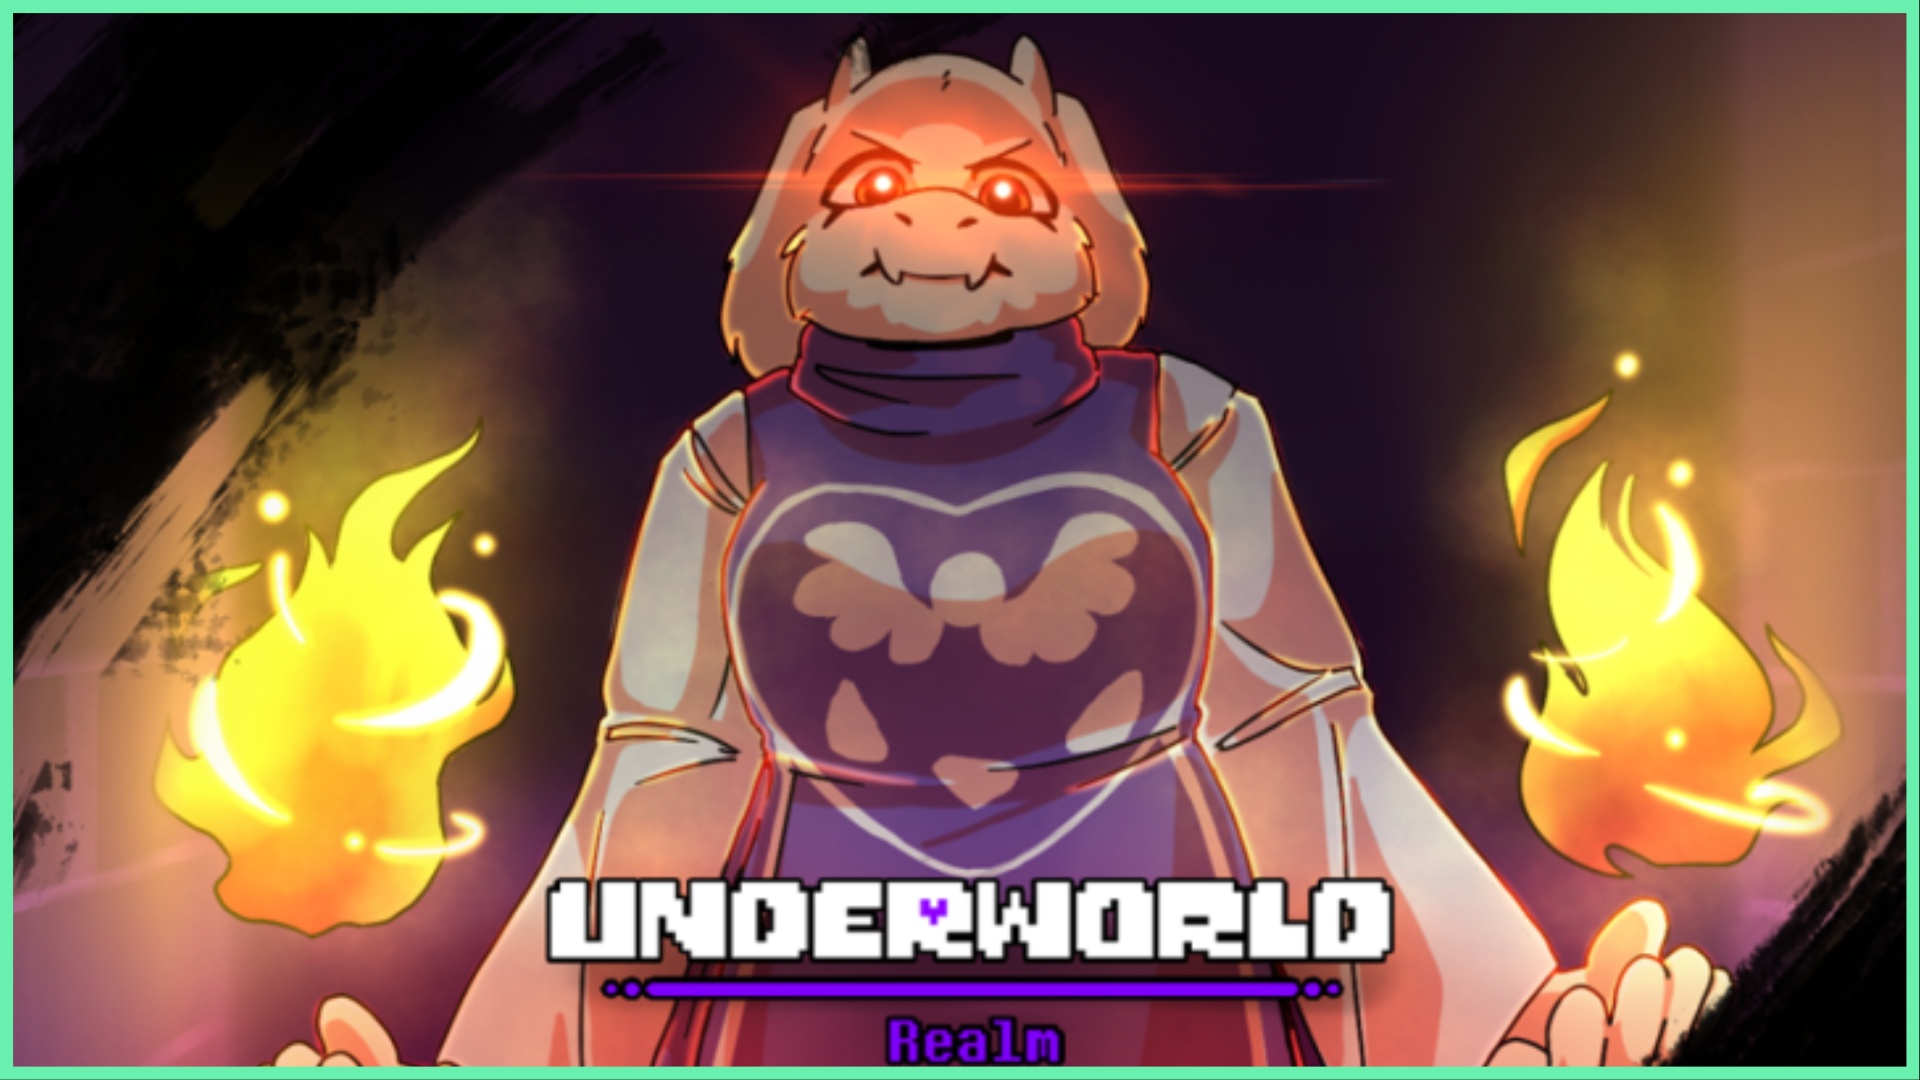 the image shows a look-up view on an undertale character who is a white female goat with a purple dress. Her eyes are a glowy red and she looks rather frustrated. Both her hands are shroud in floating fire